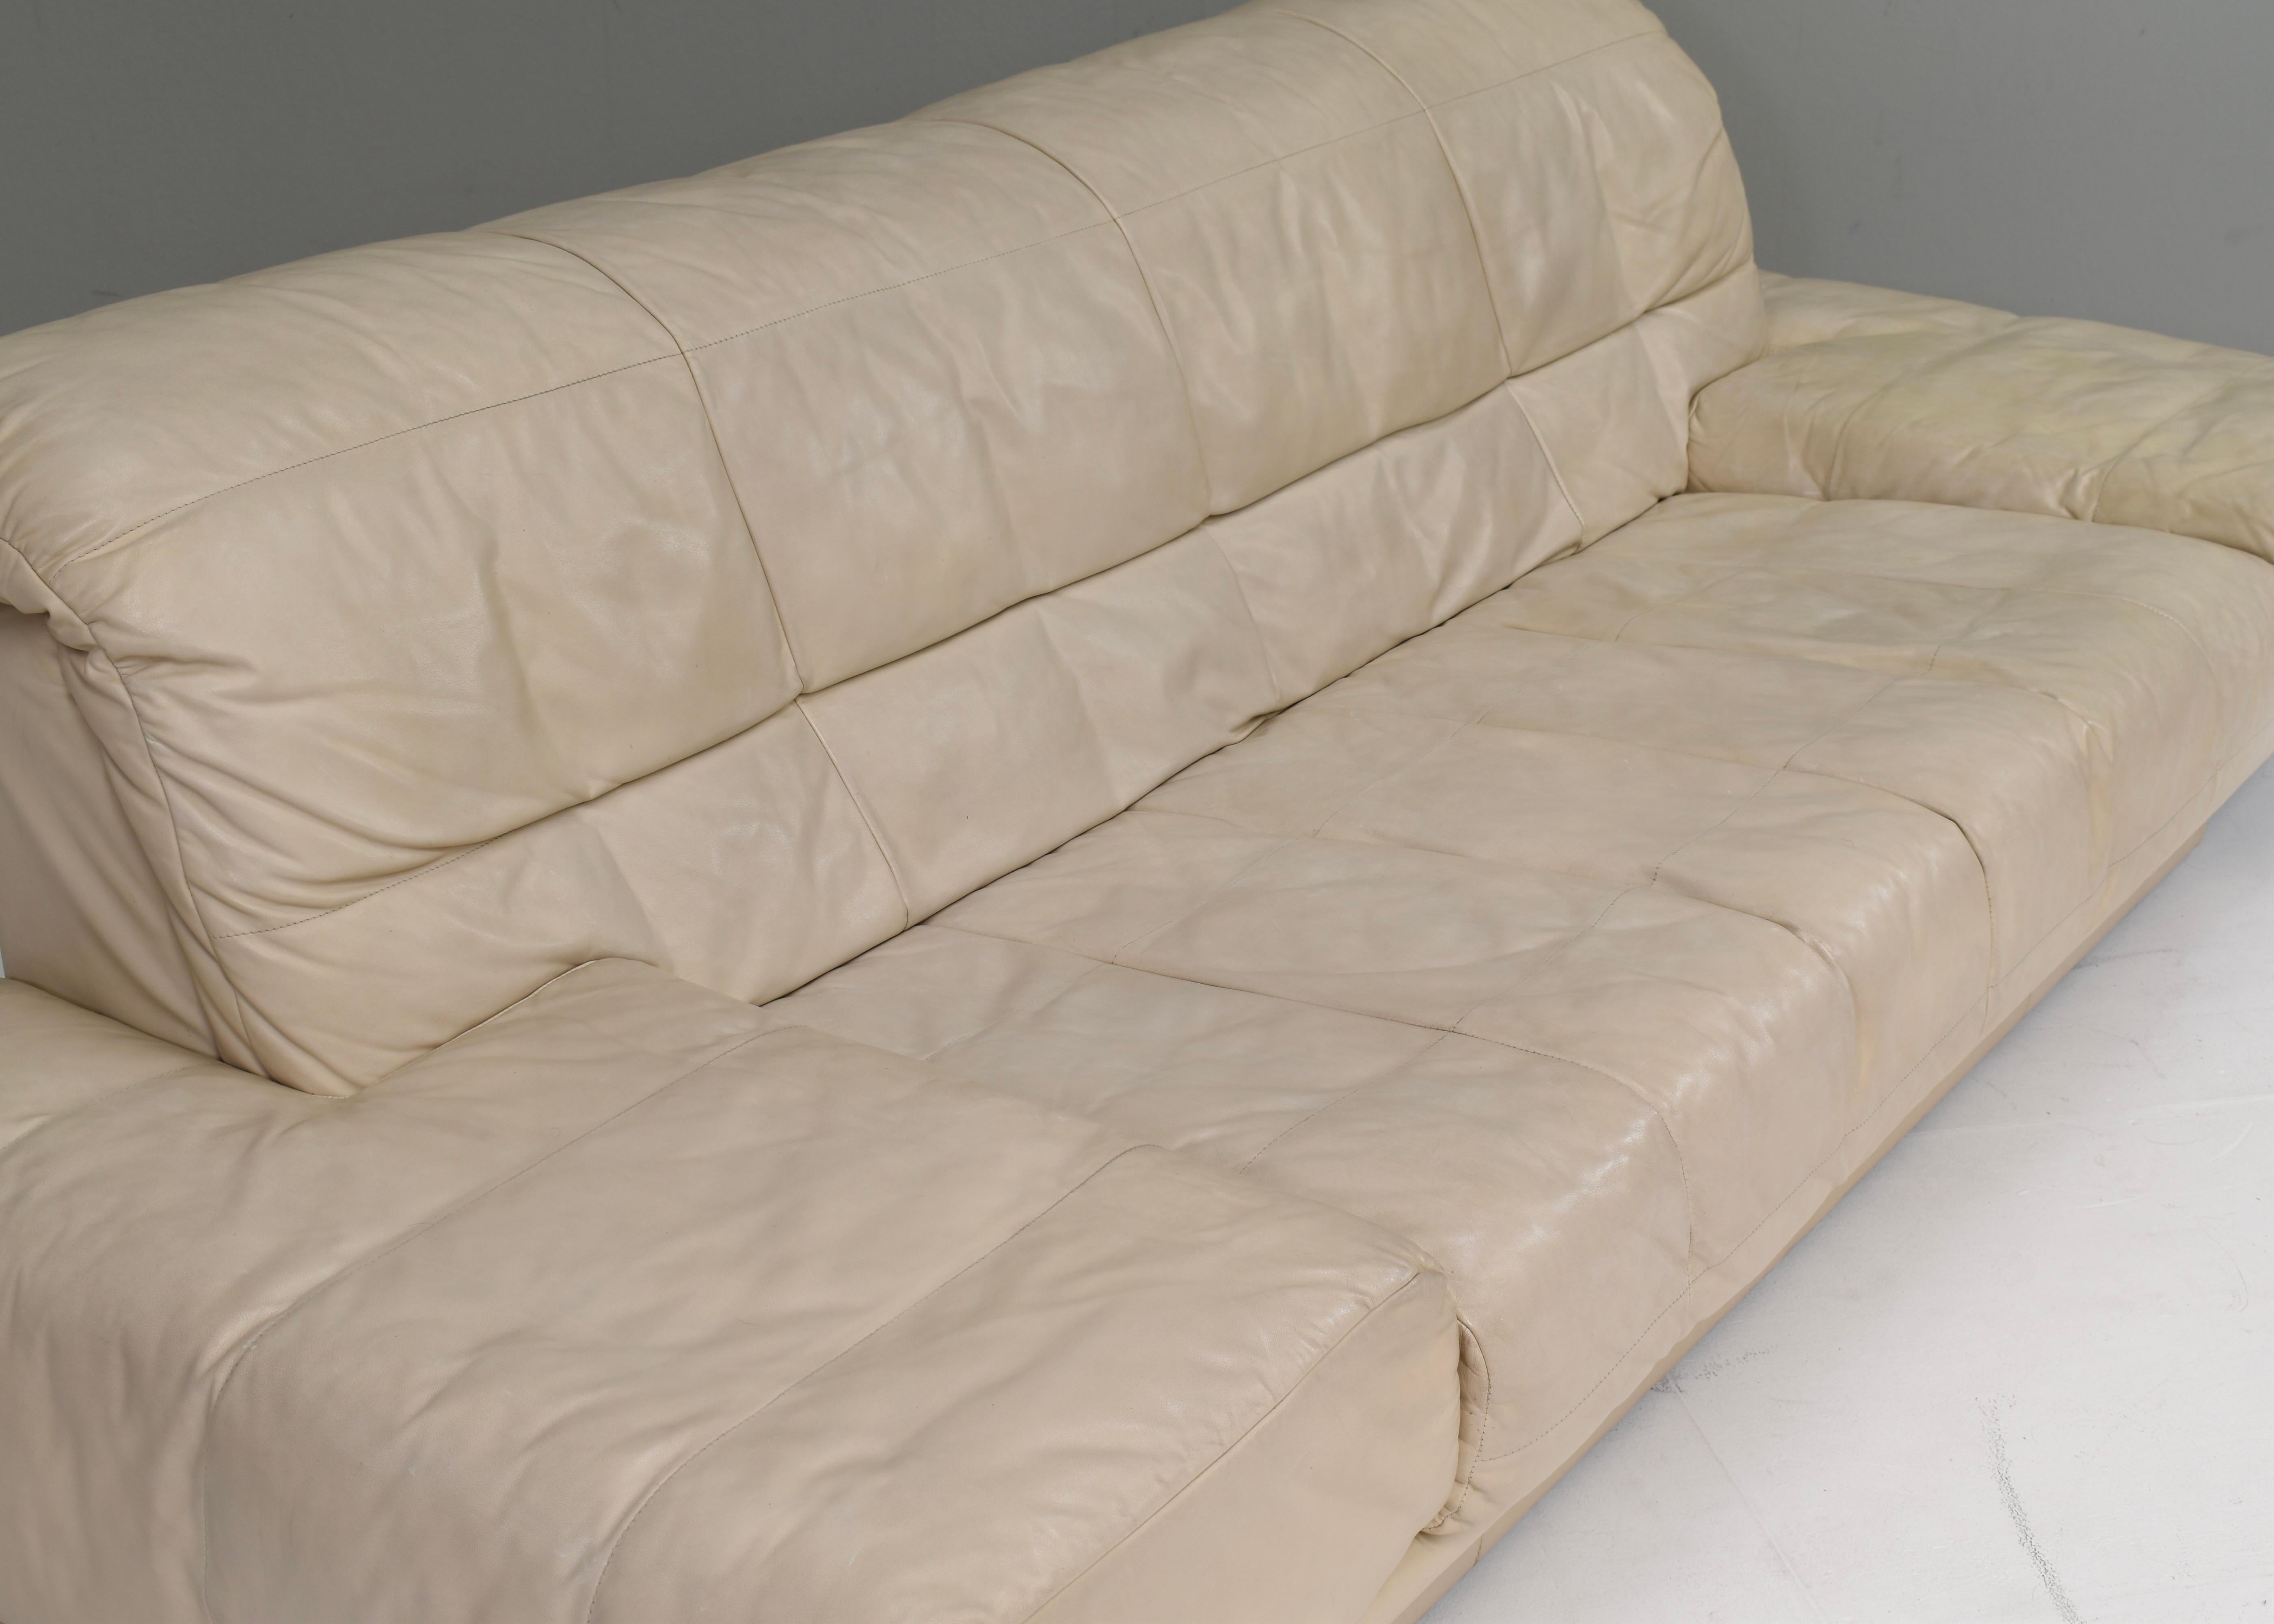 Rolf Benz 3-seat sofa in Ivory Cream Leather – Germany, circa 1980-1990 For Sale 4